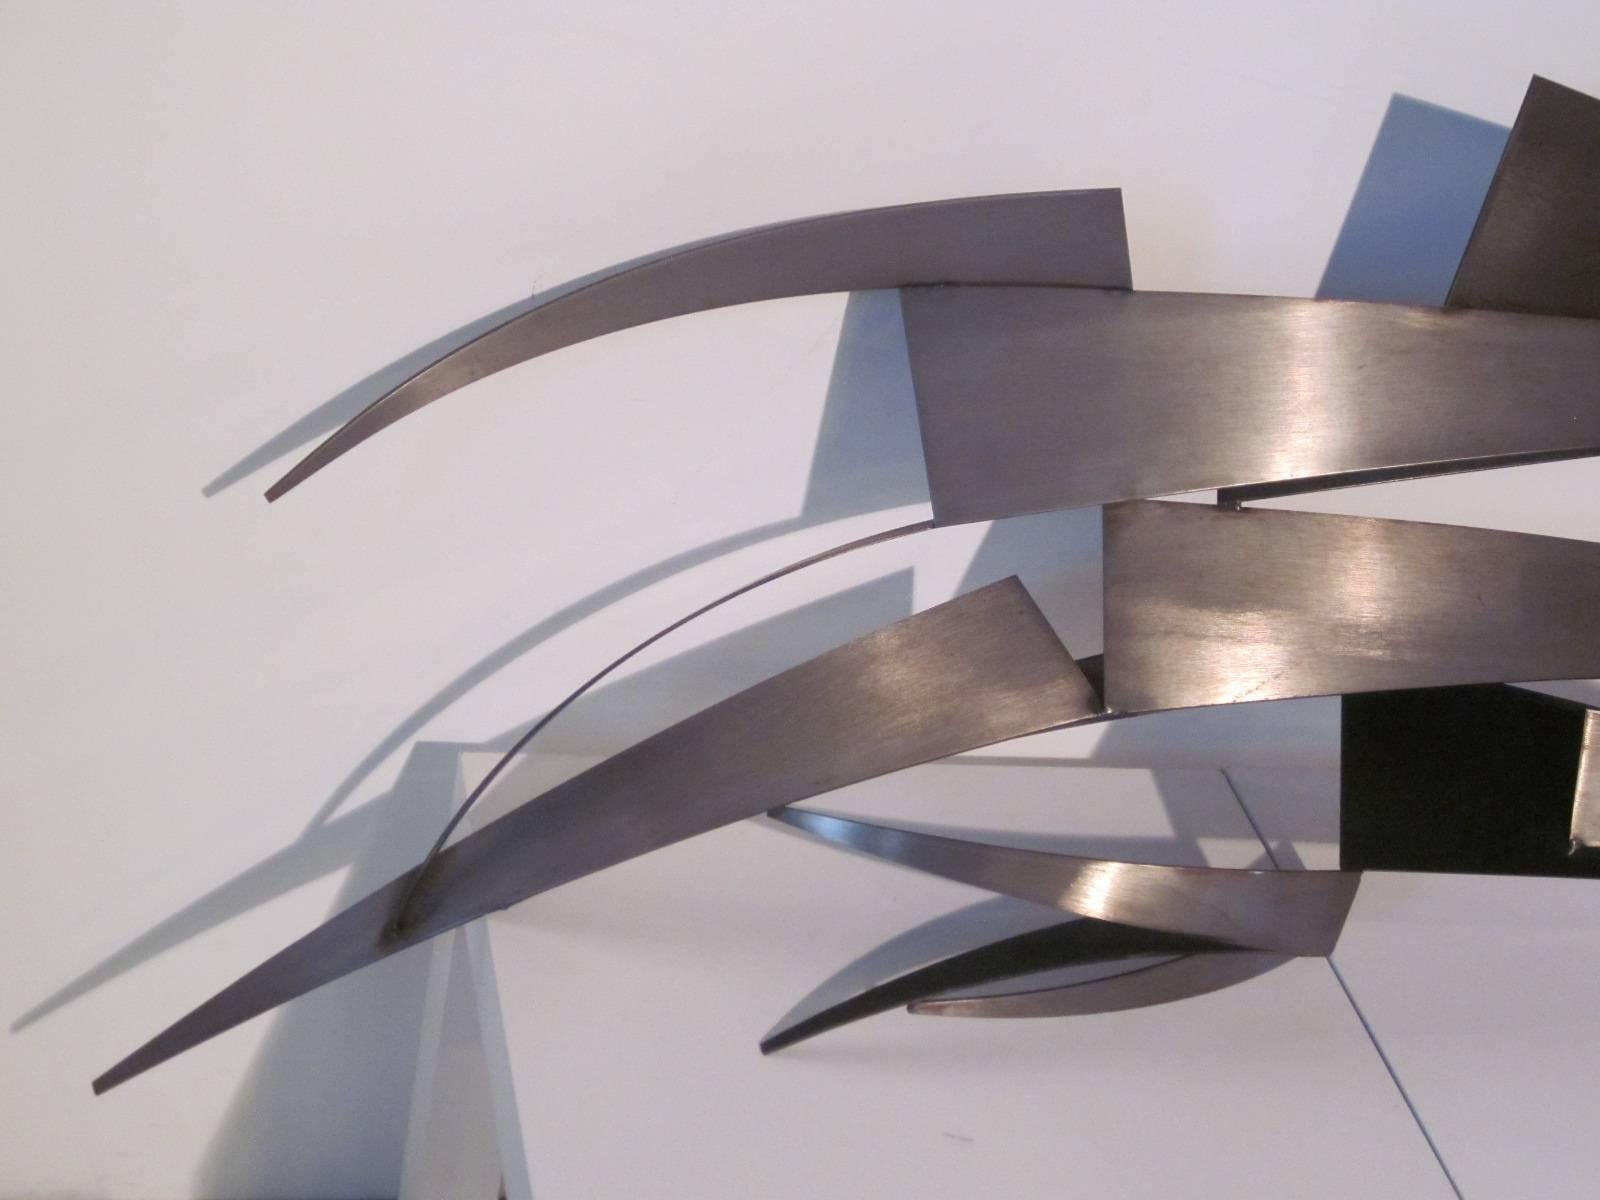 A stainless steel and satin black metal wall sculpture with welded and cut pieces that flair out to each side, hanger mounts are attached to the reverse manufactured by Curtis Jere.